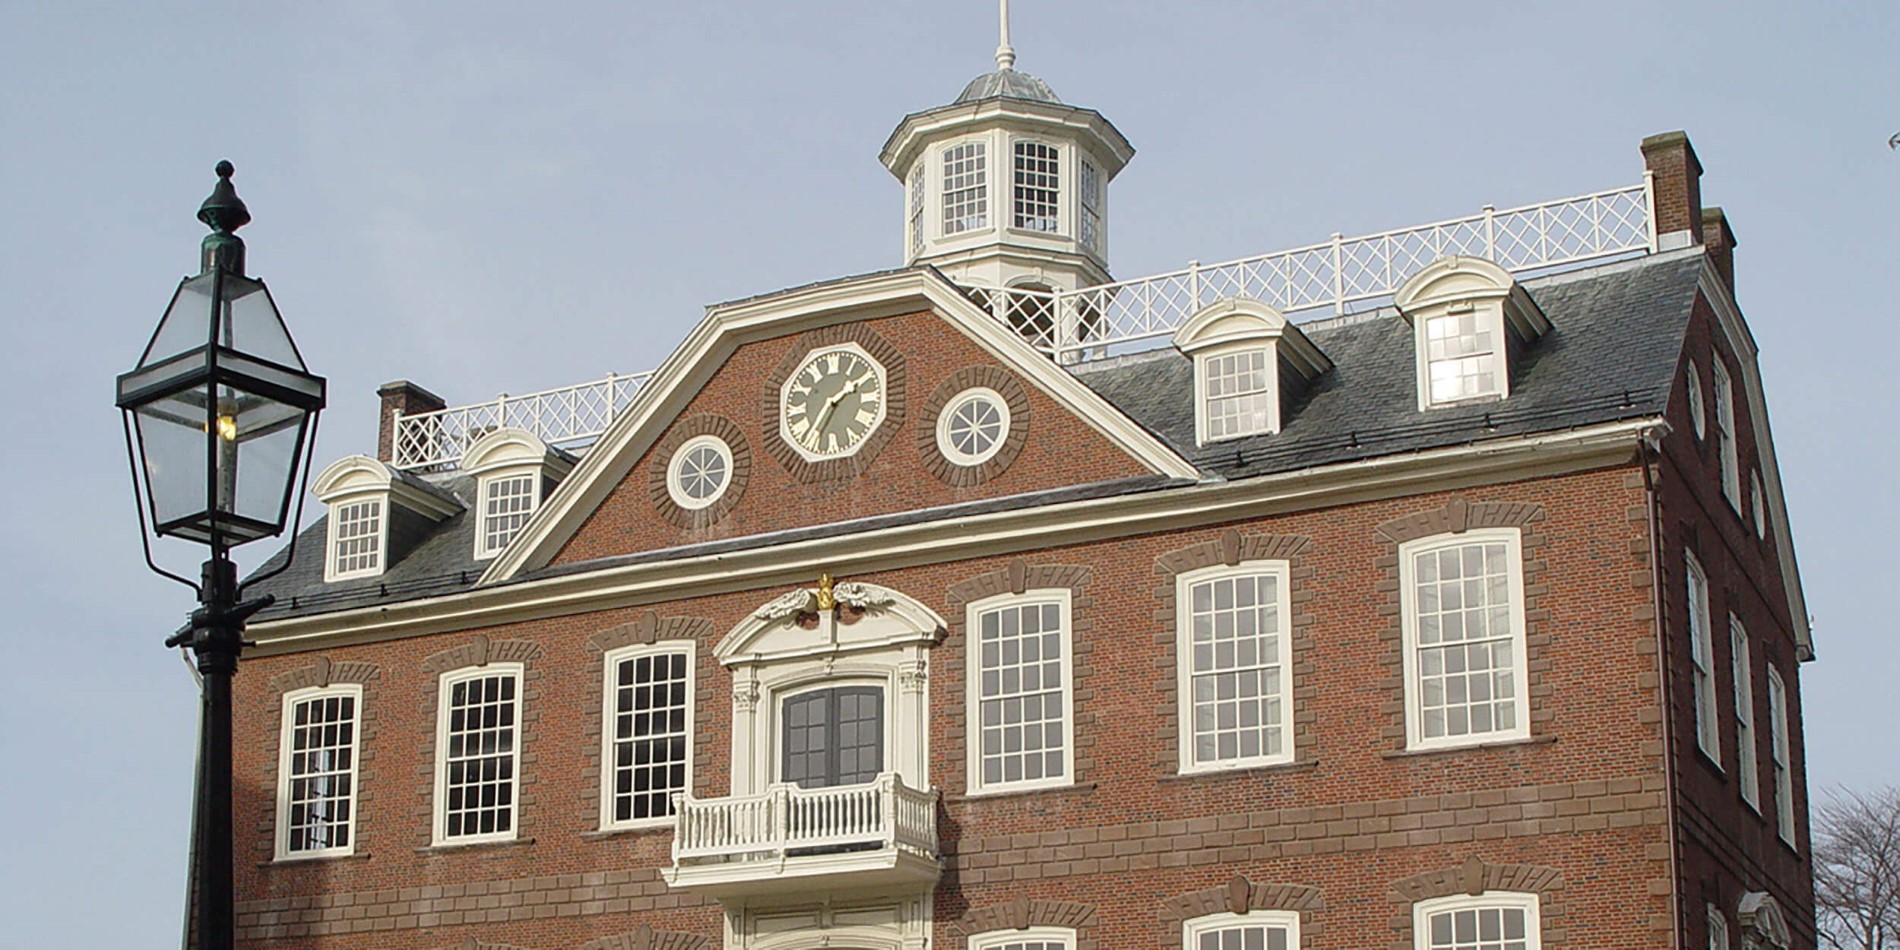 A clock tower in front of a brick building